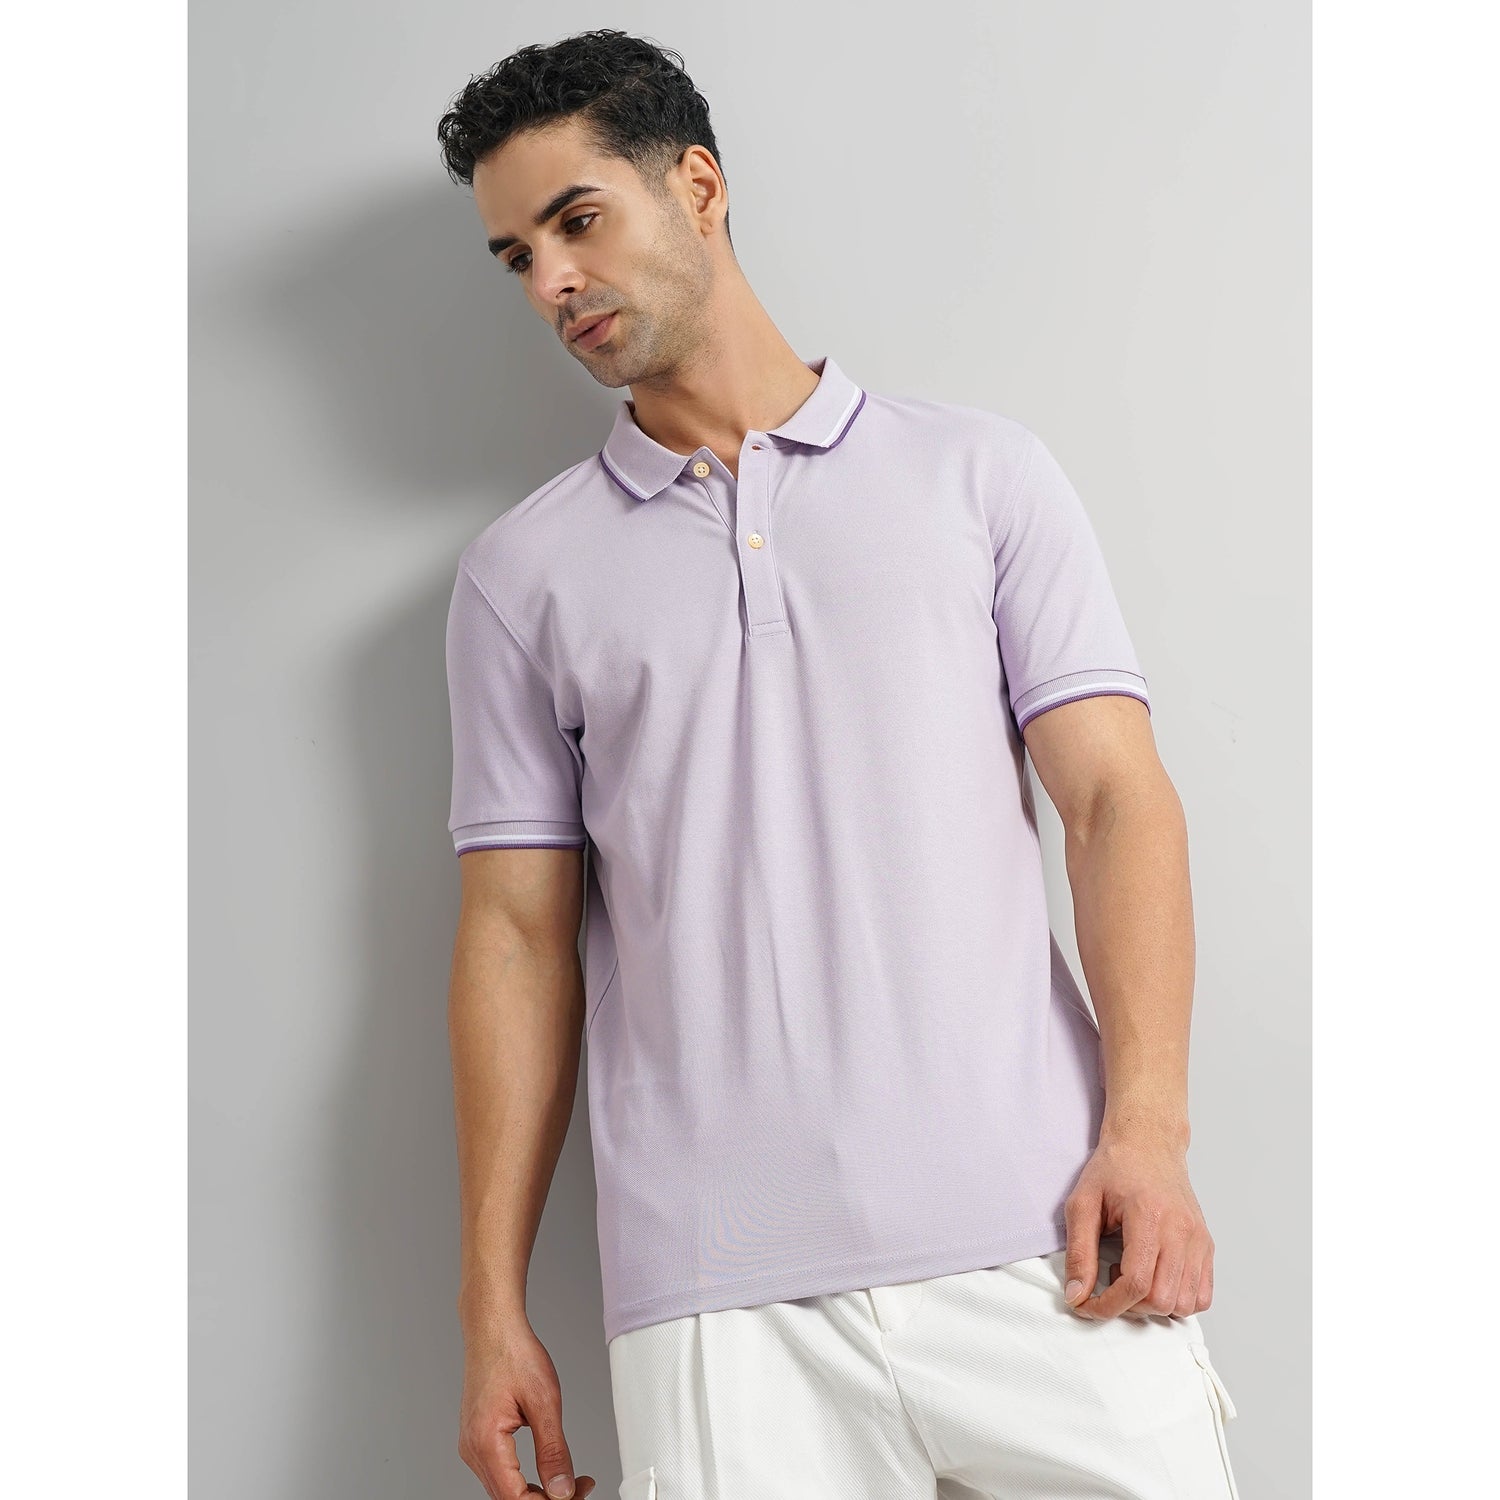 Men's Purple Solid Slim Fit Cotton Polo with Tipping Tshirts (DECOLRAYEB3)